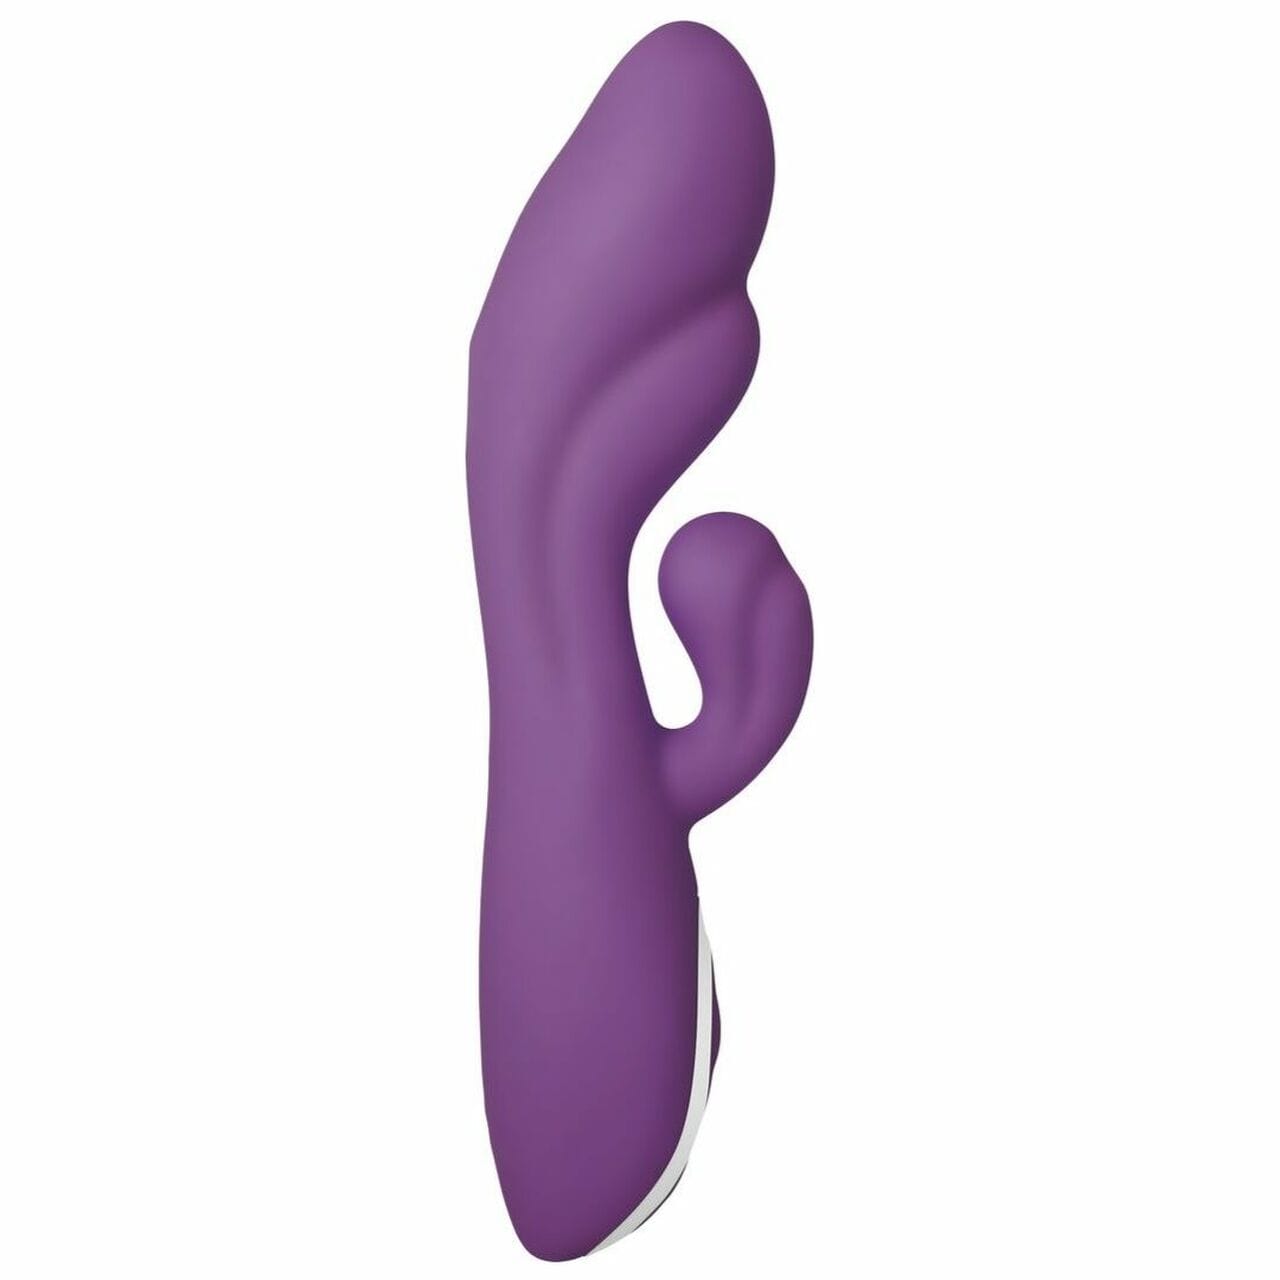 Evolved Rabbit Purple Evolved Rampage Powerful and Girthy Rabbit Vibrator at the Haus of Shag